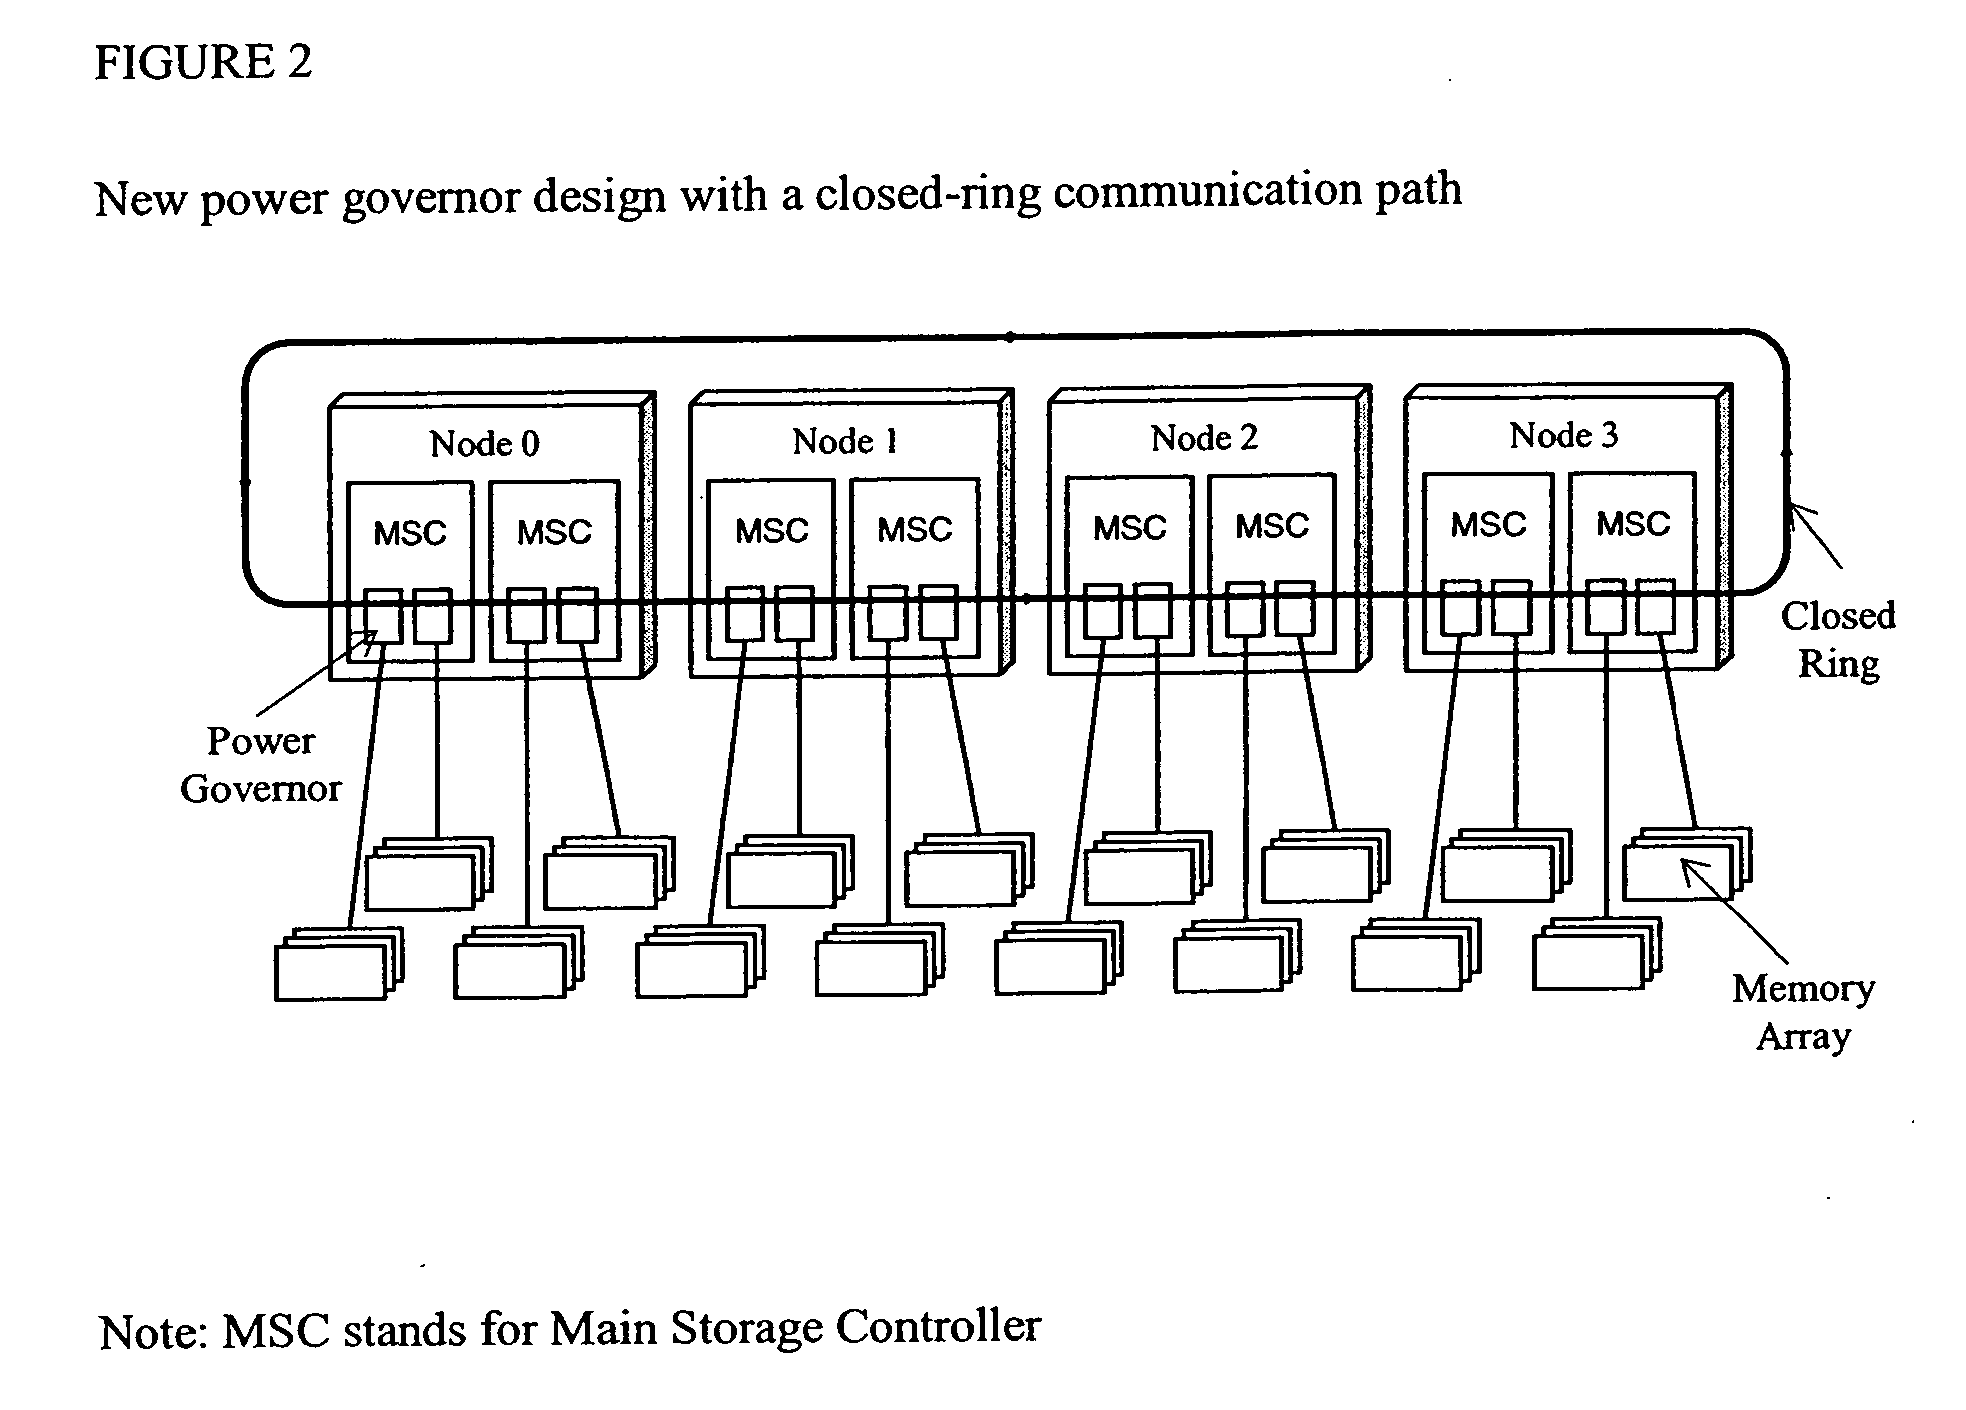 Power governor for DRAM in a multi-node computer system